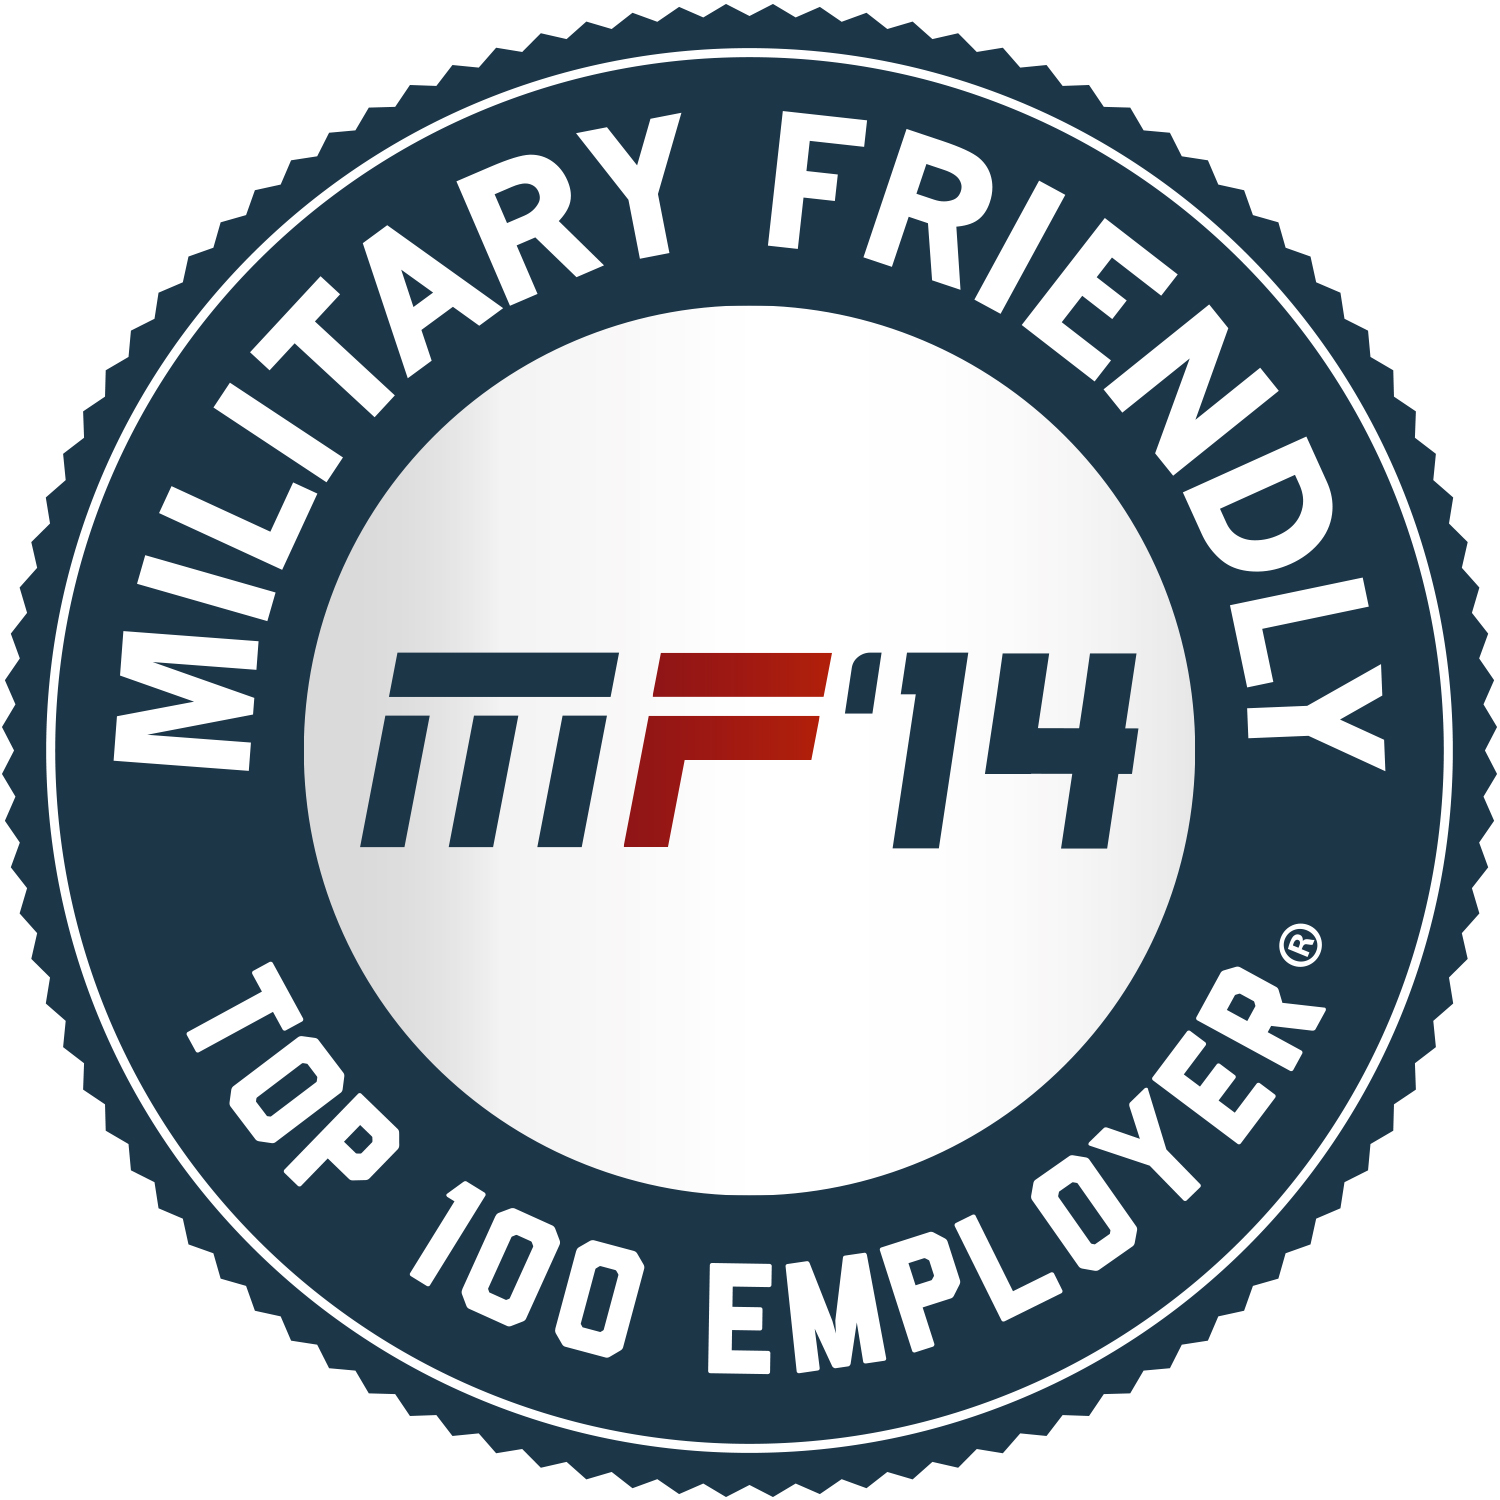 G.I. Jobs 2014 Top 100 Military Friendly Employers